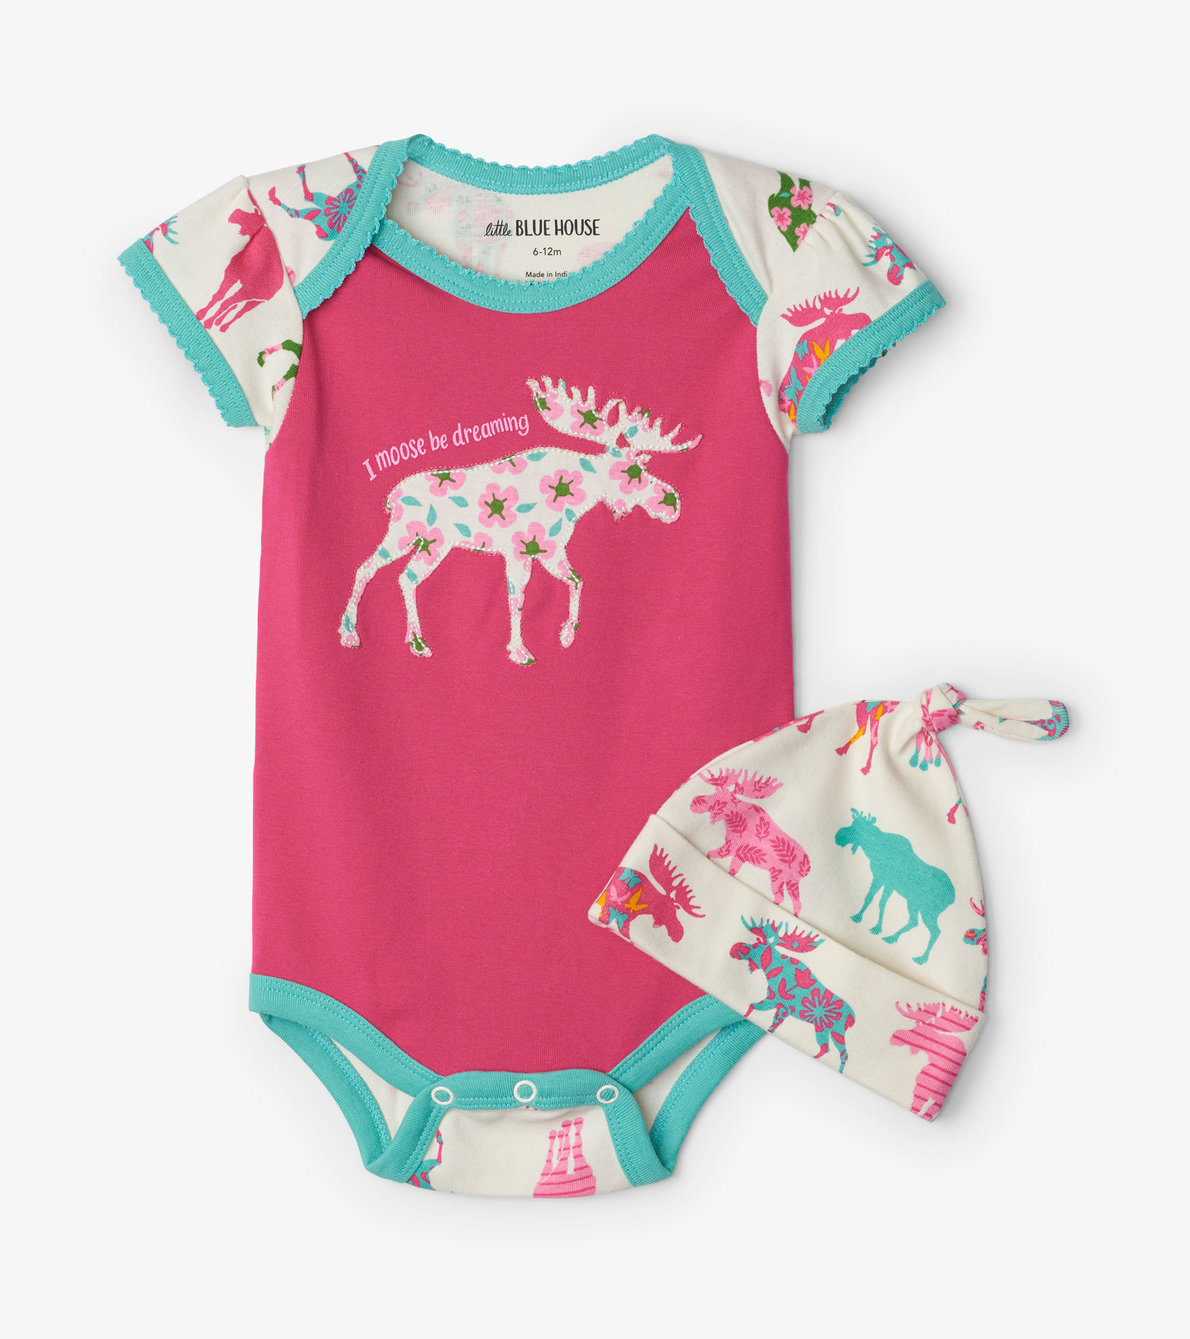 View larger image of Patterned Moose Baby Bodysuit with Hat